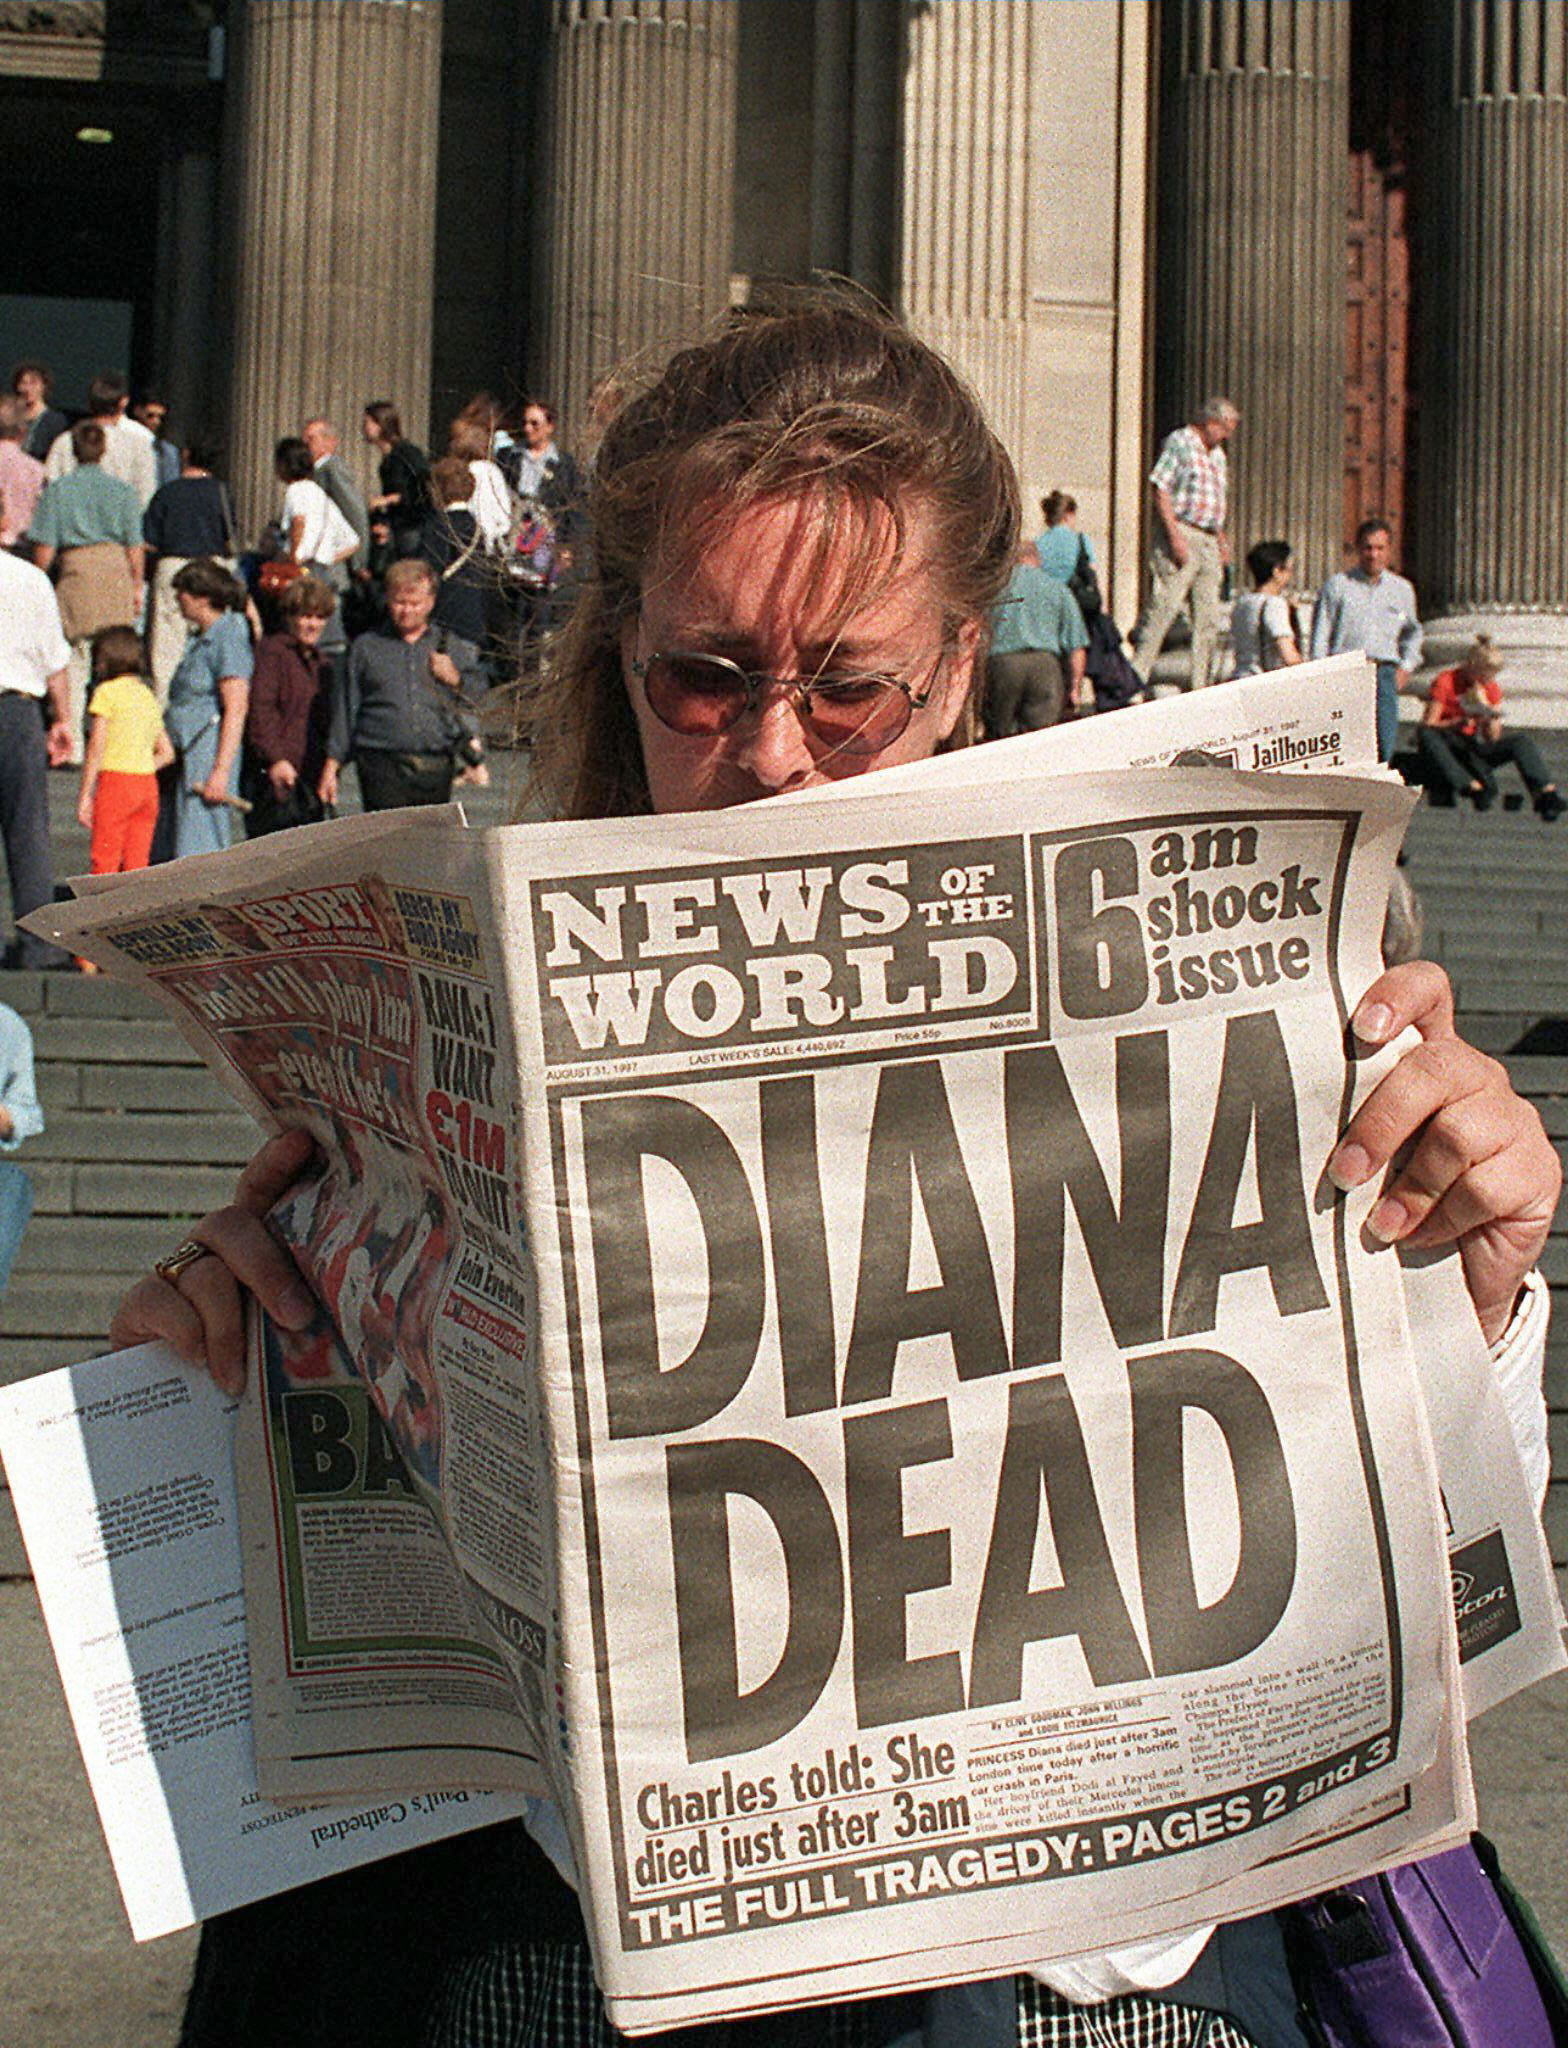 Person reads newspaper headline about Princess Diana&#x27;s death outside a building with steps and columns, conveying the news&#x27; impact